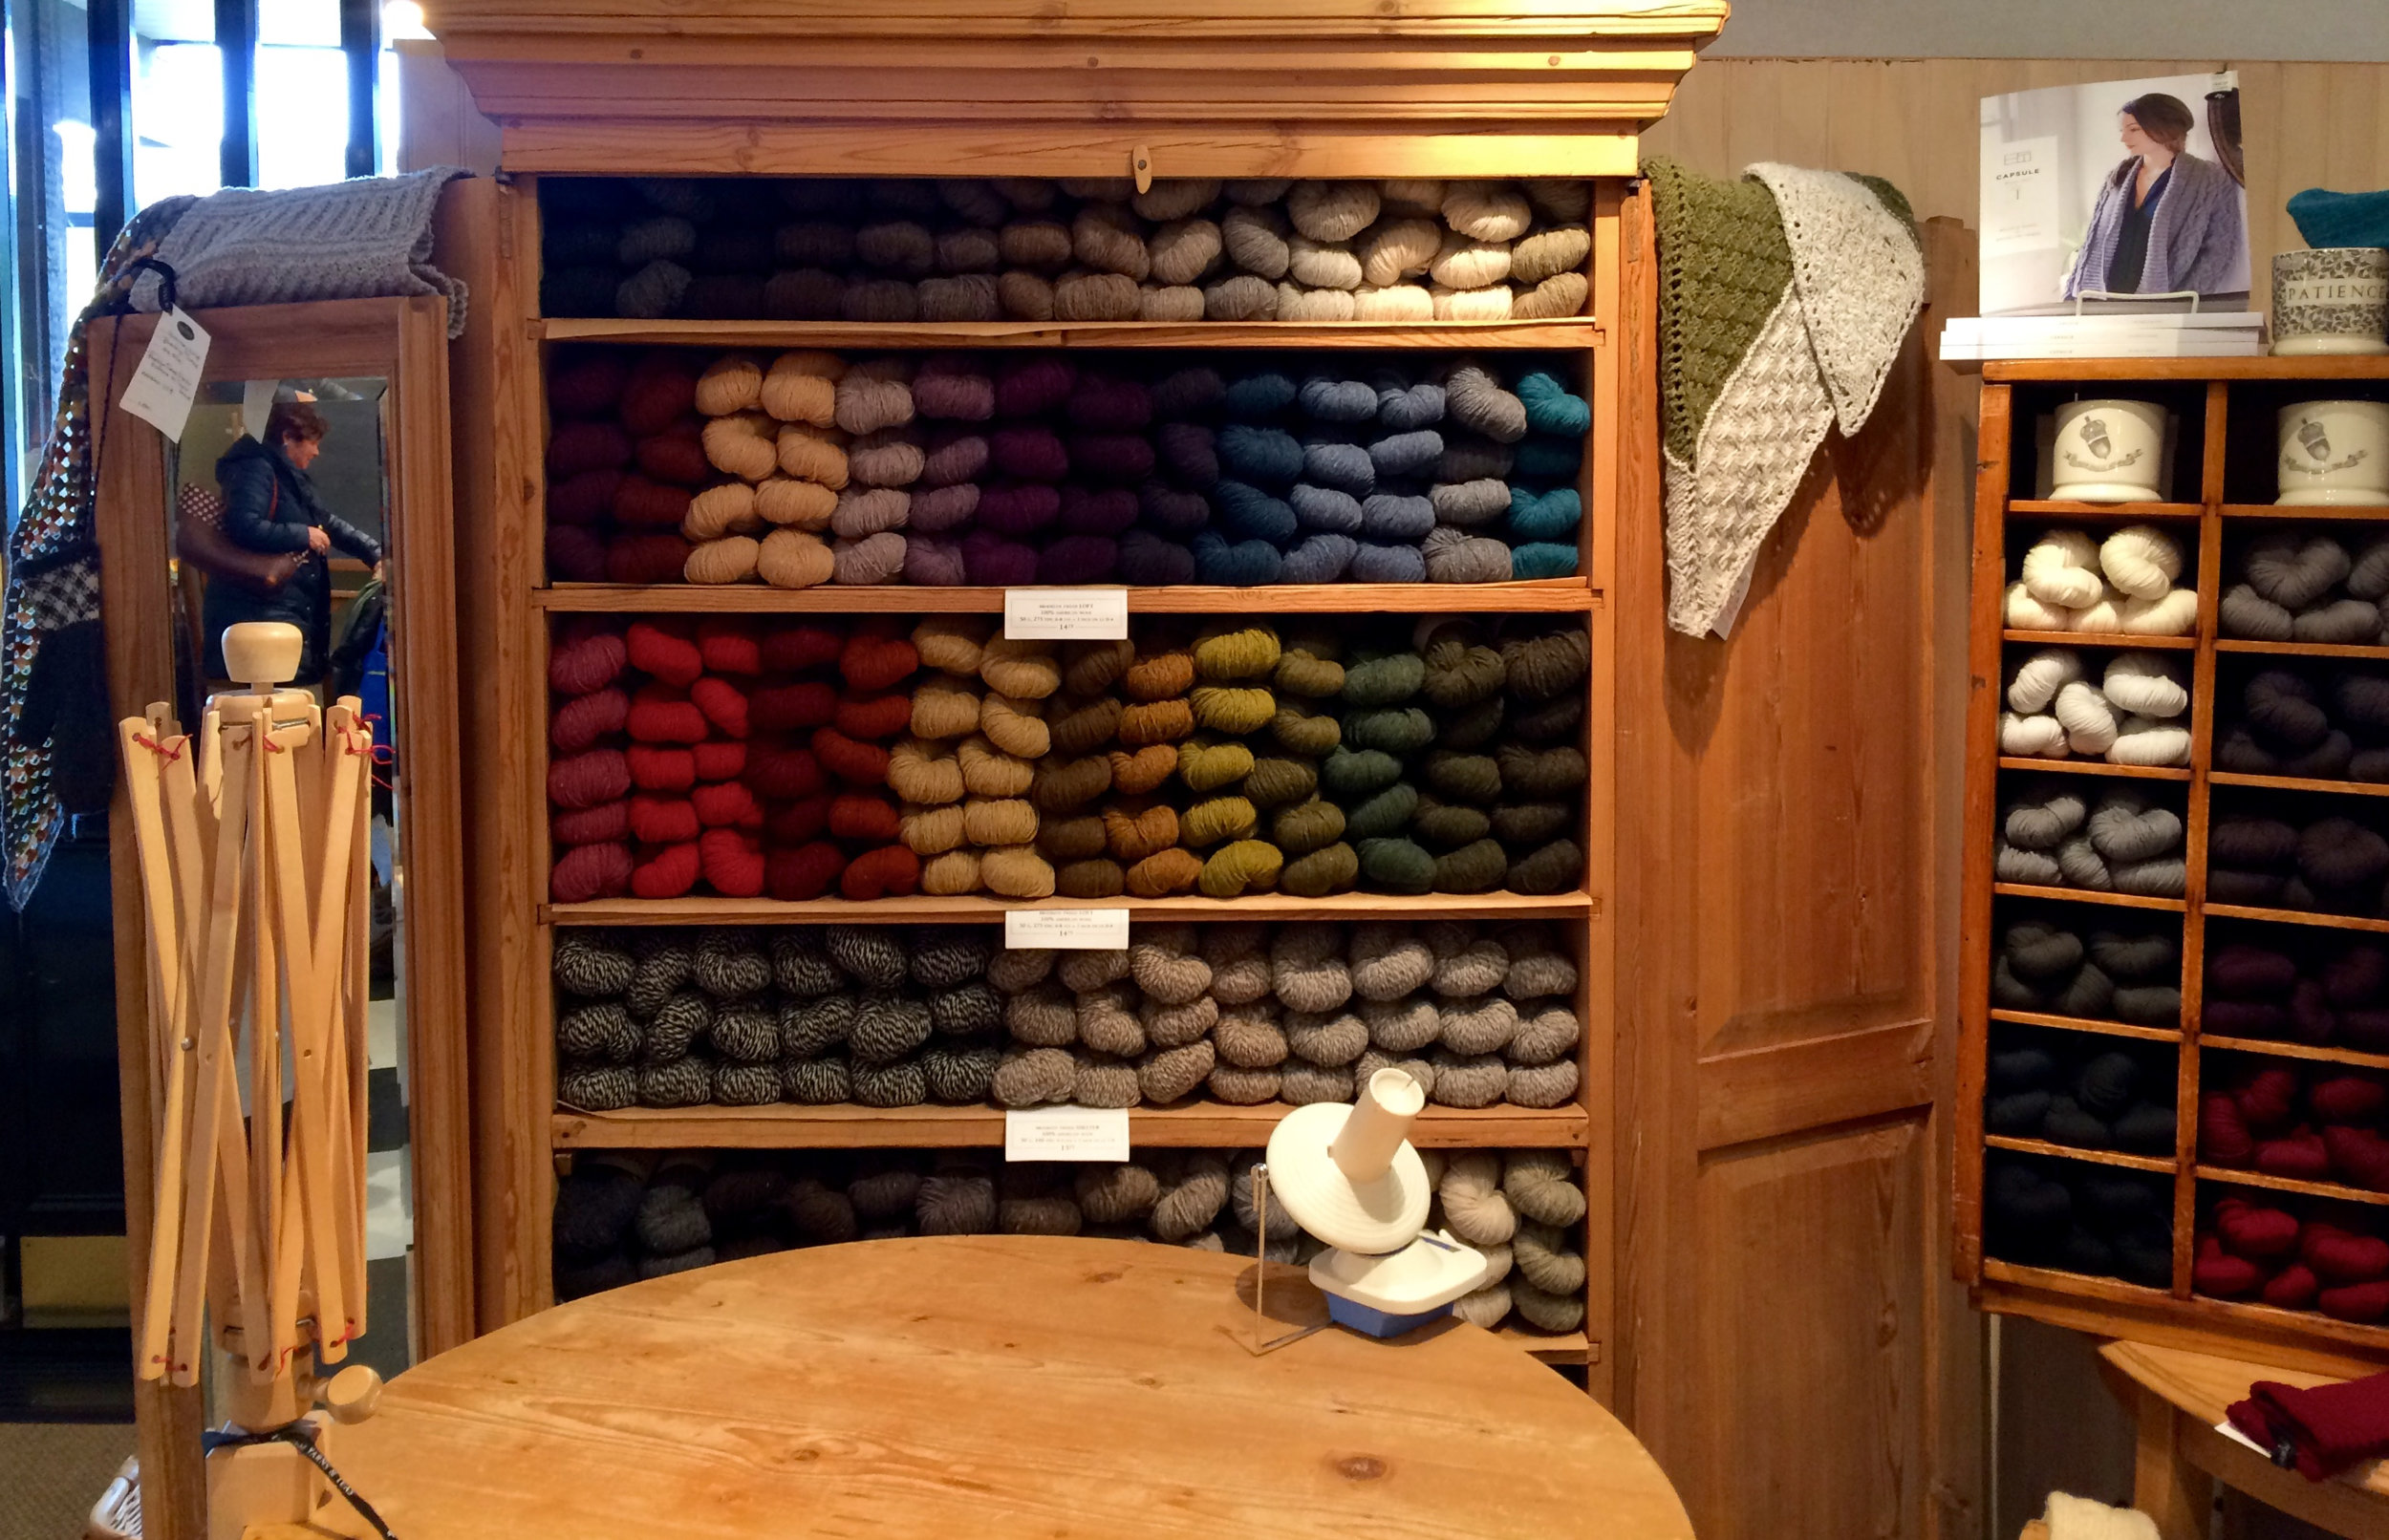  A wardrobe full of yarn just waiting to be wound. The sweet staff will happily wind your yarn for you on site. 